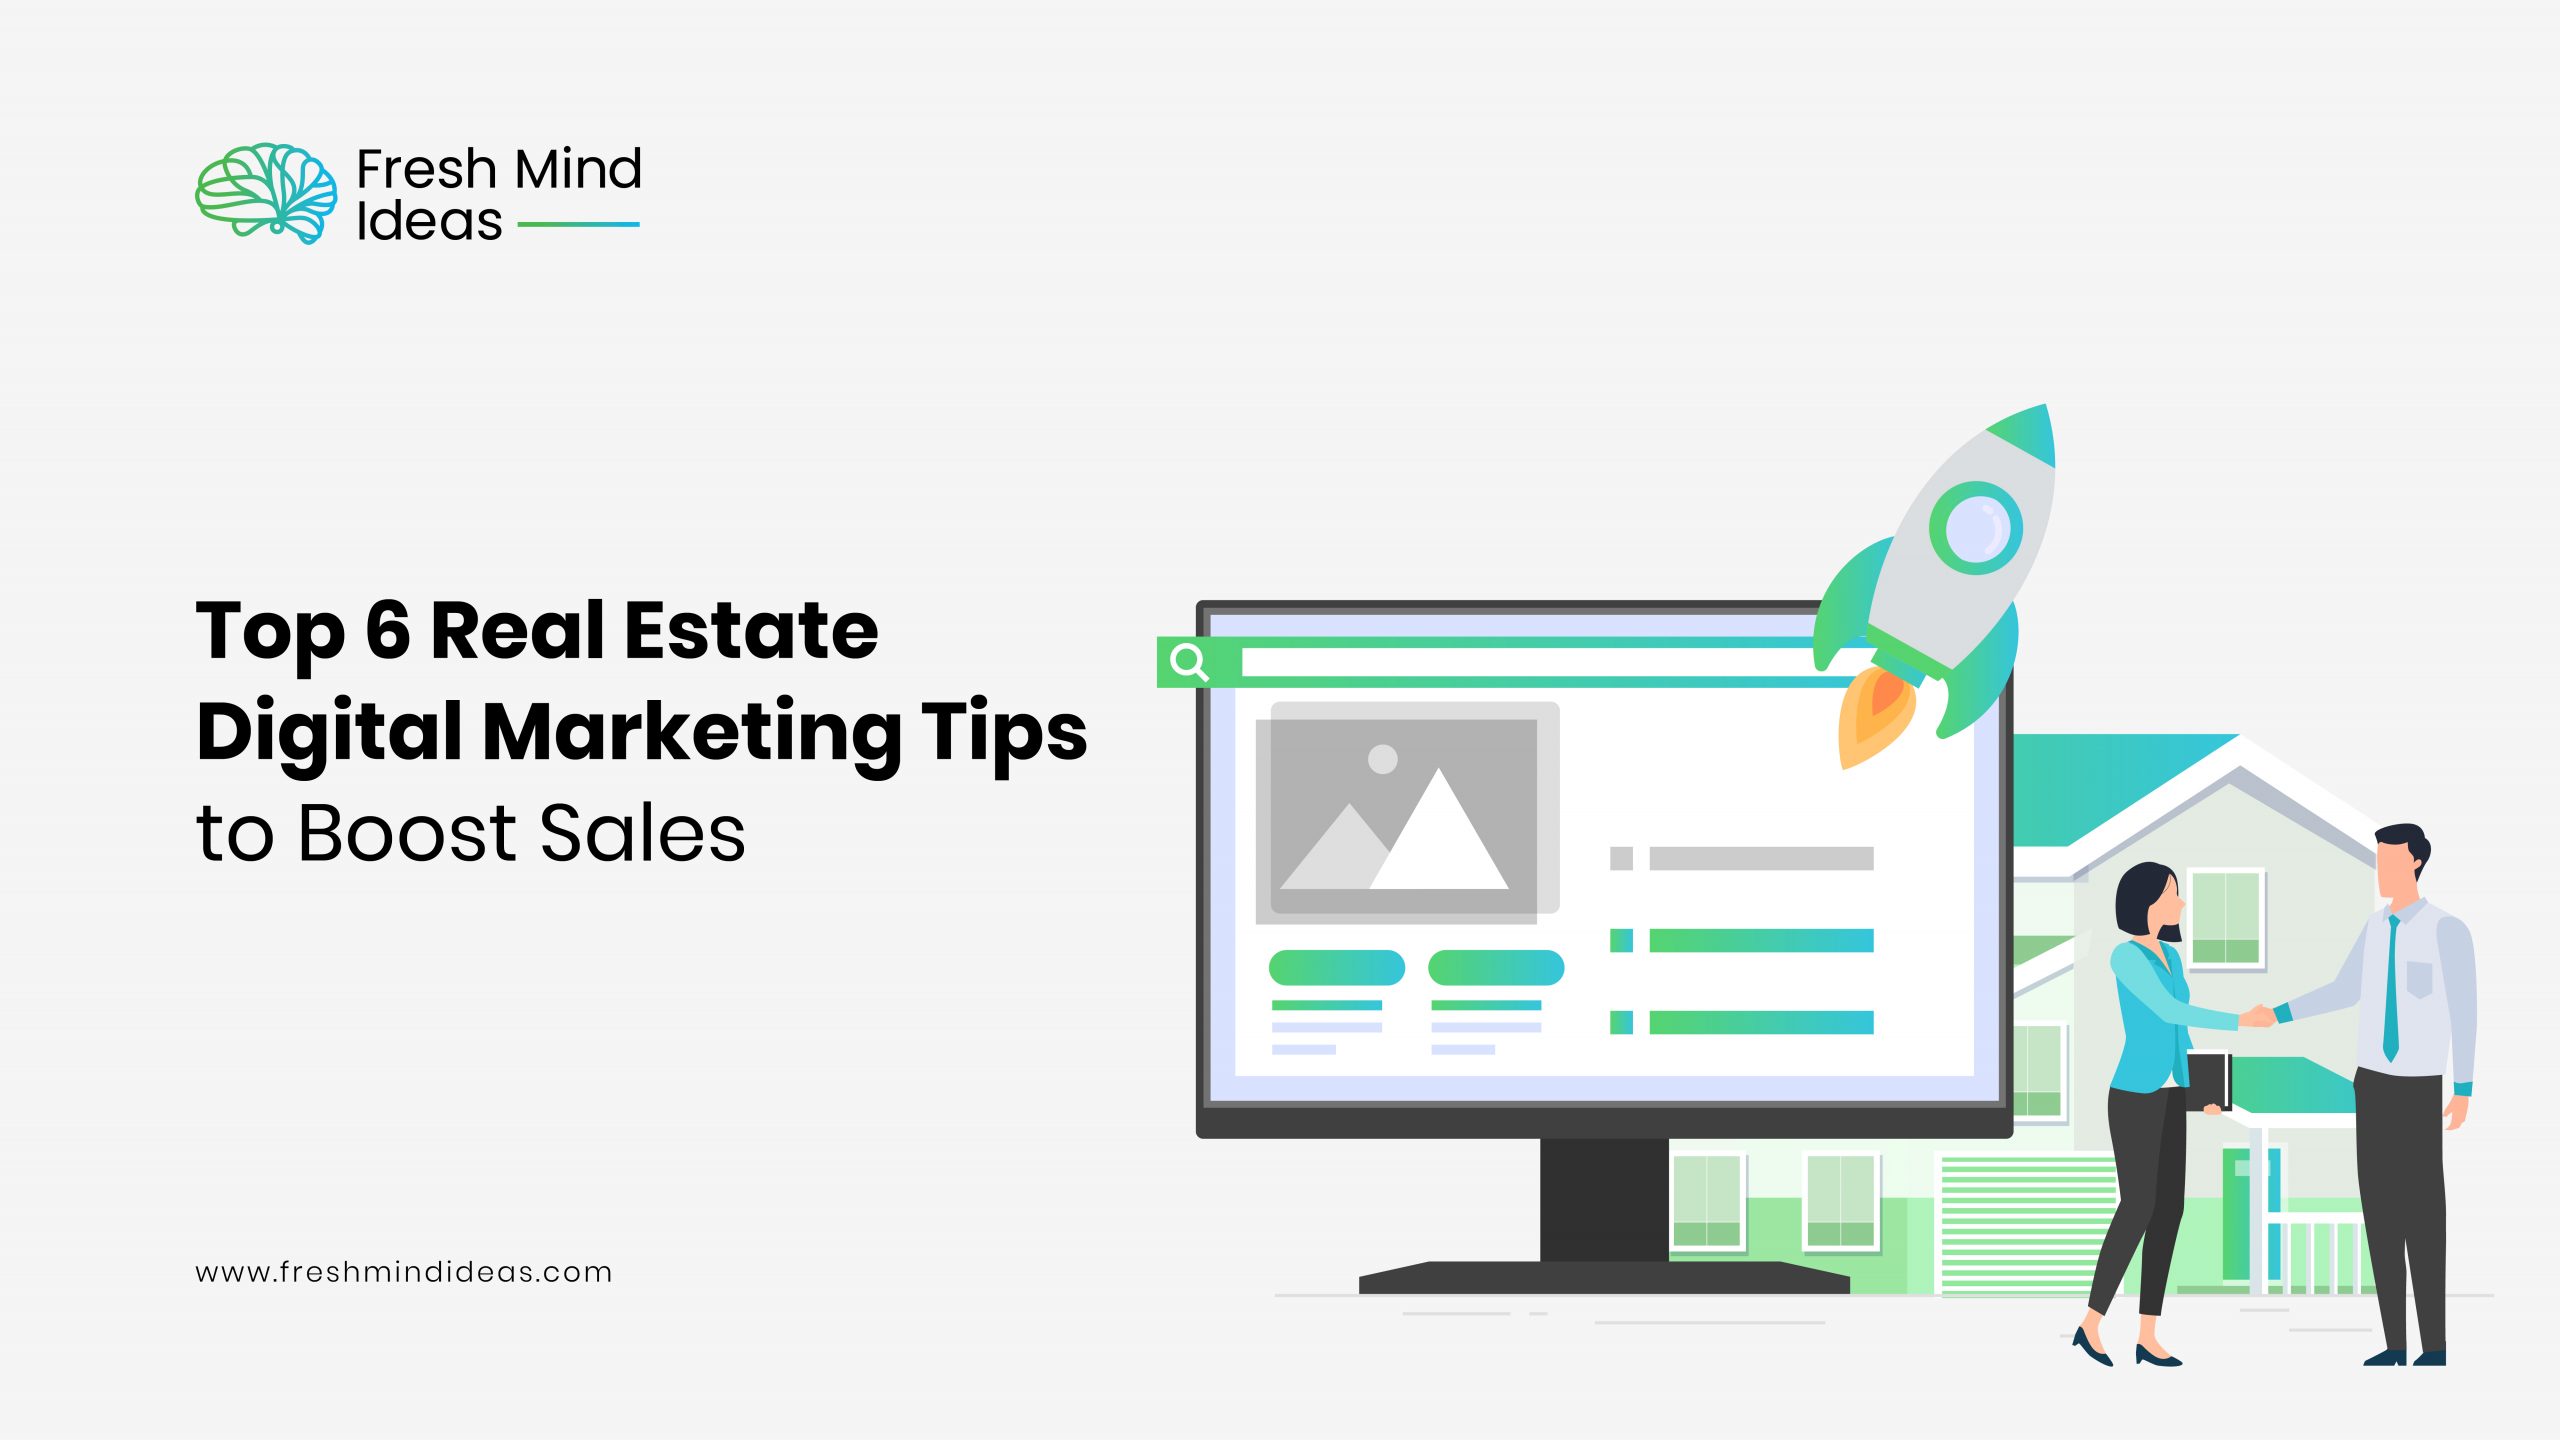 Top 6 Real Estate Digital Marketing Tips to Boost Sales